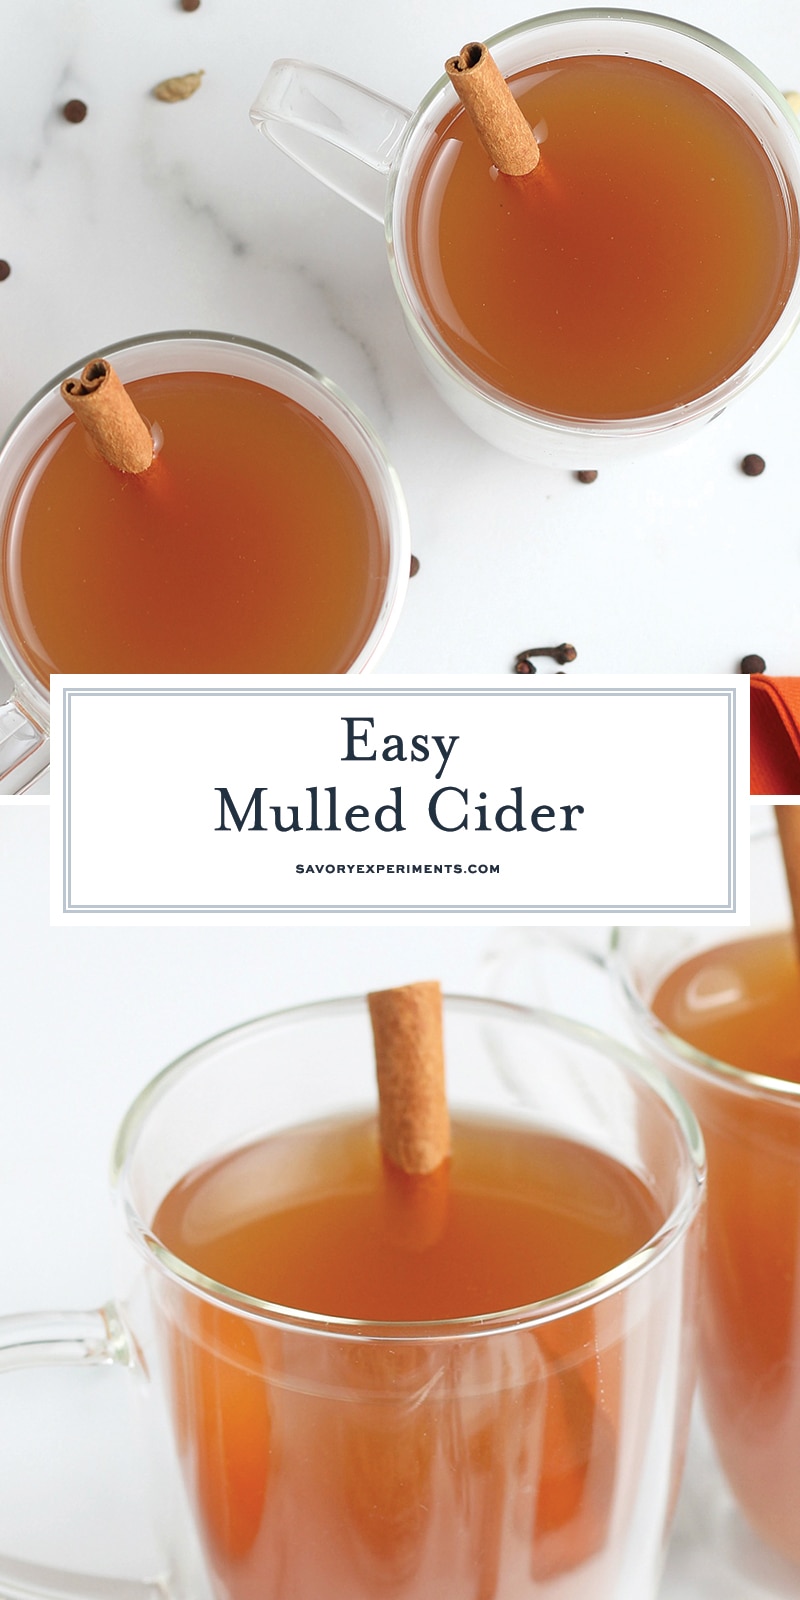 BEST Mulled Cider Recipe - The Perfect Fall Drink, You can spike it too!